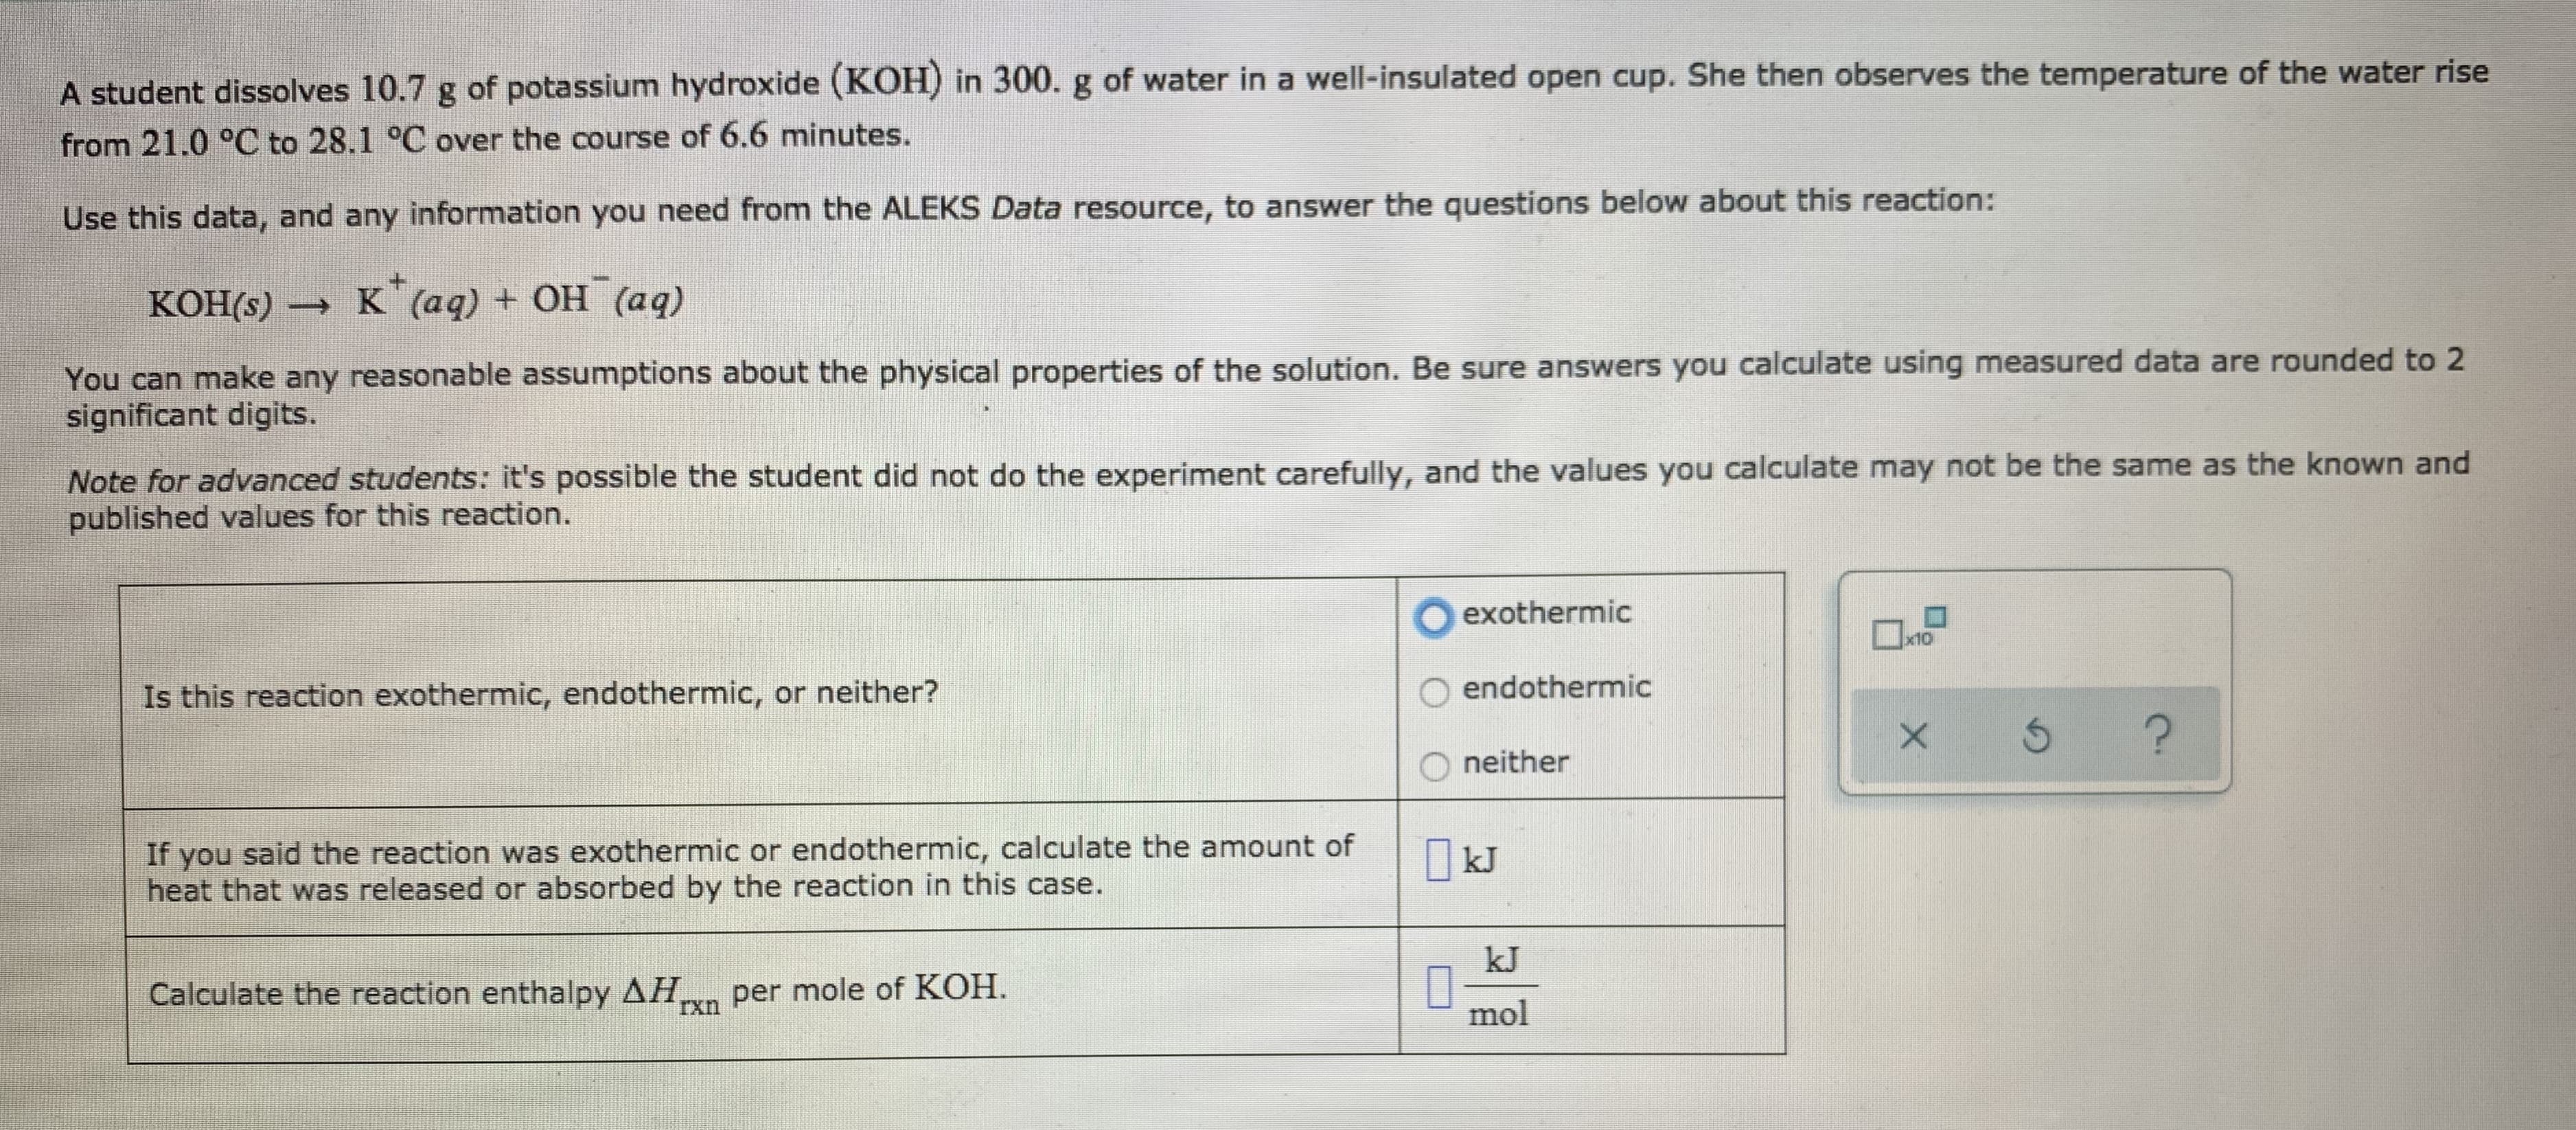 A student dissolves 10.7 g of potassium hydroxide (KOH) in 300.g of water in a well-insulated open cup. She then observes the temperature of the water rise
from 21.0 °C to 28.1 °C over the course of 6.6 minutes.
Use this data, and any information you need from the ALEKS Data resource, to answer the questions below about this reaction:
— К (ад) + ОН (ад)
You can make any reasonable assumptions about the physical properties of the solution. Be sure answers you calculate using measured data are rounded to 2
significant digits.
Note for advanced students: it's possible the student did not do the experiment carefully, and the values you calculate may not be the same as the known and
published values for this reaction.
exothermic
x10
Is this reaction exothermic, endothermic, or neither?
endothermic
neither
If you said the reaction was exothermic or endothermic, calculate the amount of
heat that was released or absorbed by the reaction in this case.
kJ
kJ
Calculate the reaction enthalpy AH,
per mole of KOH.
mol
UXI
